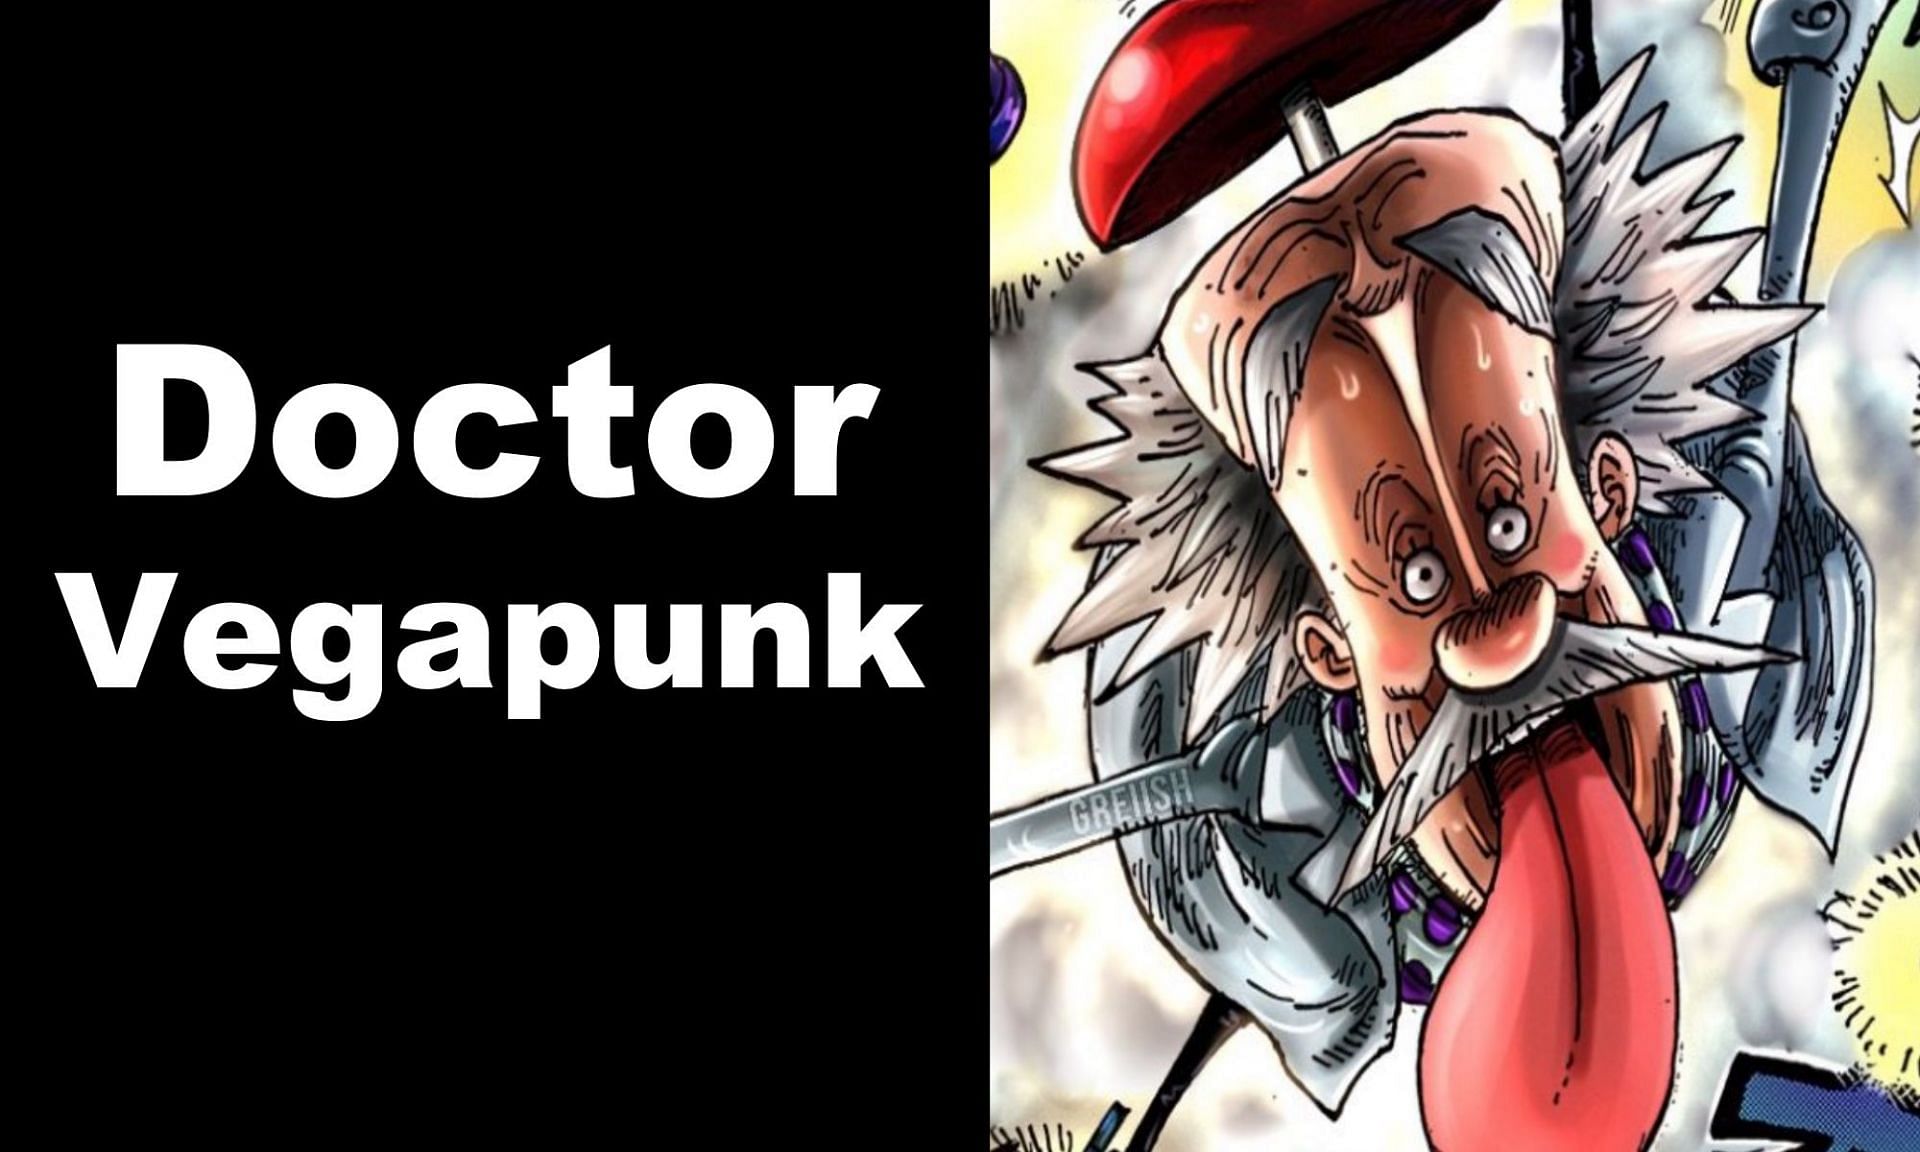 One Piece chapter 1066: Vegapunk's character design revealed